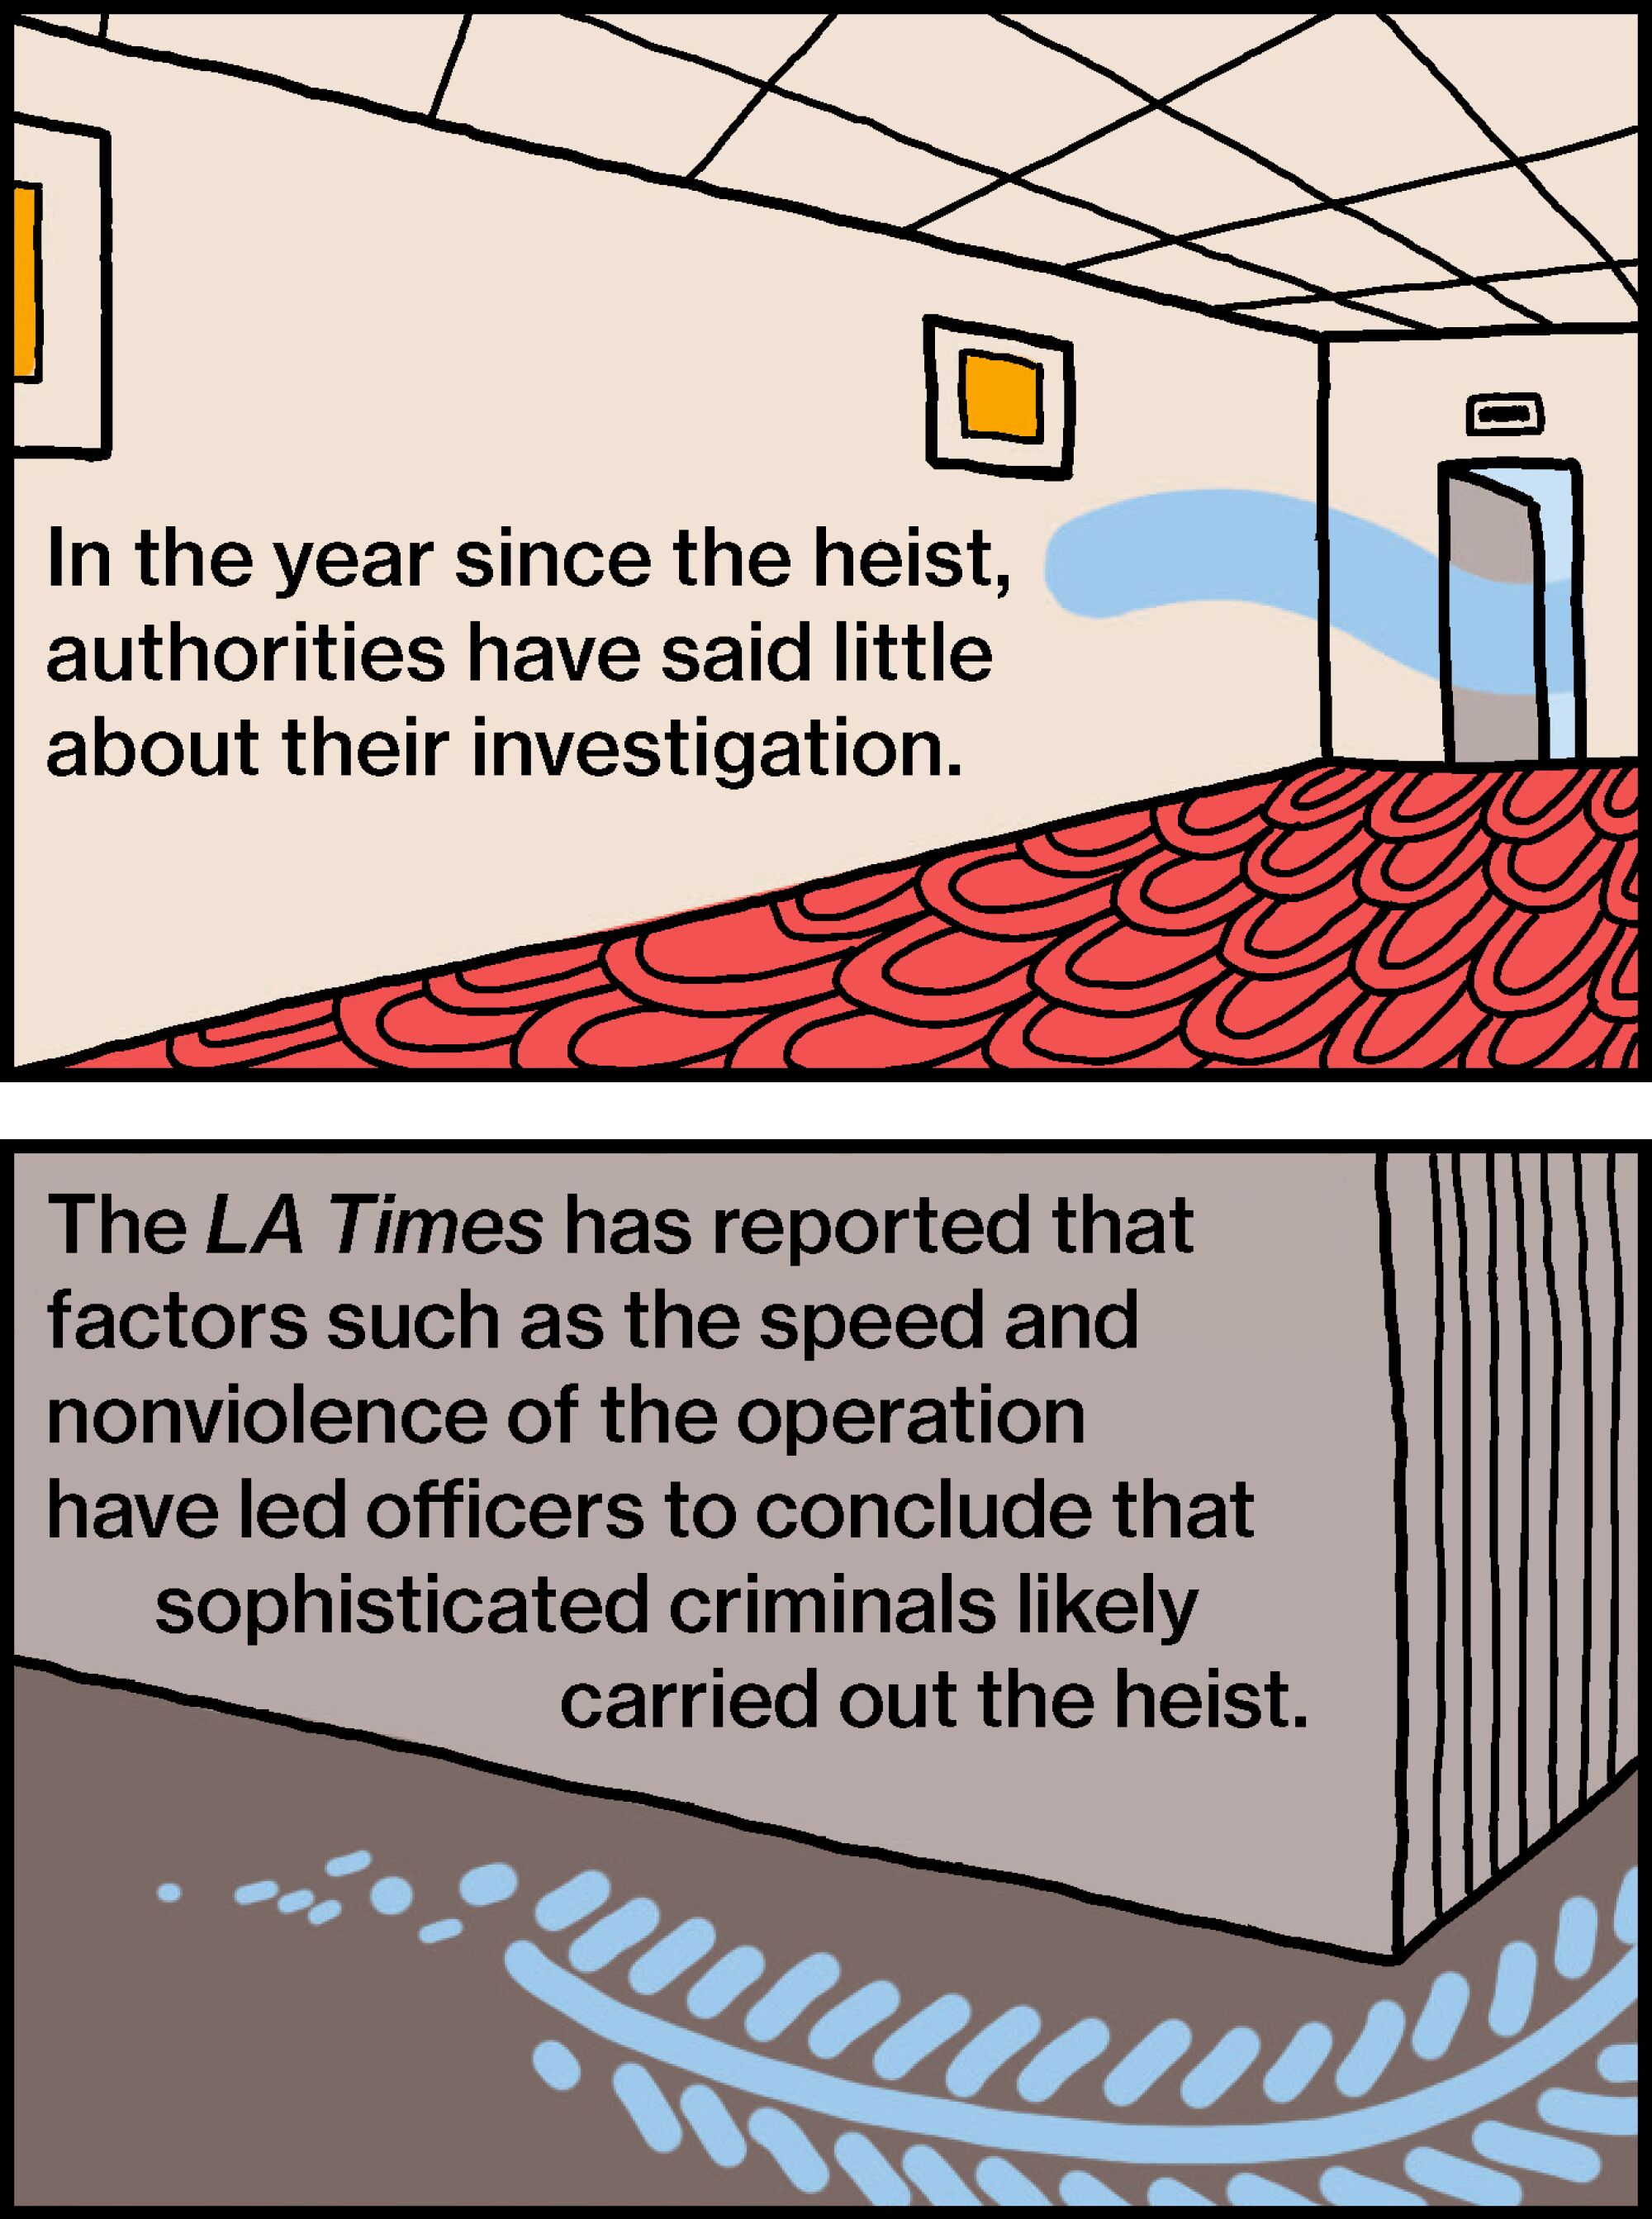 In the years since the heist, authorities have said little about their investigation.